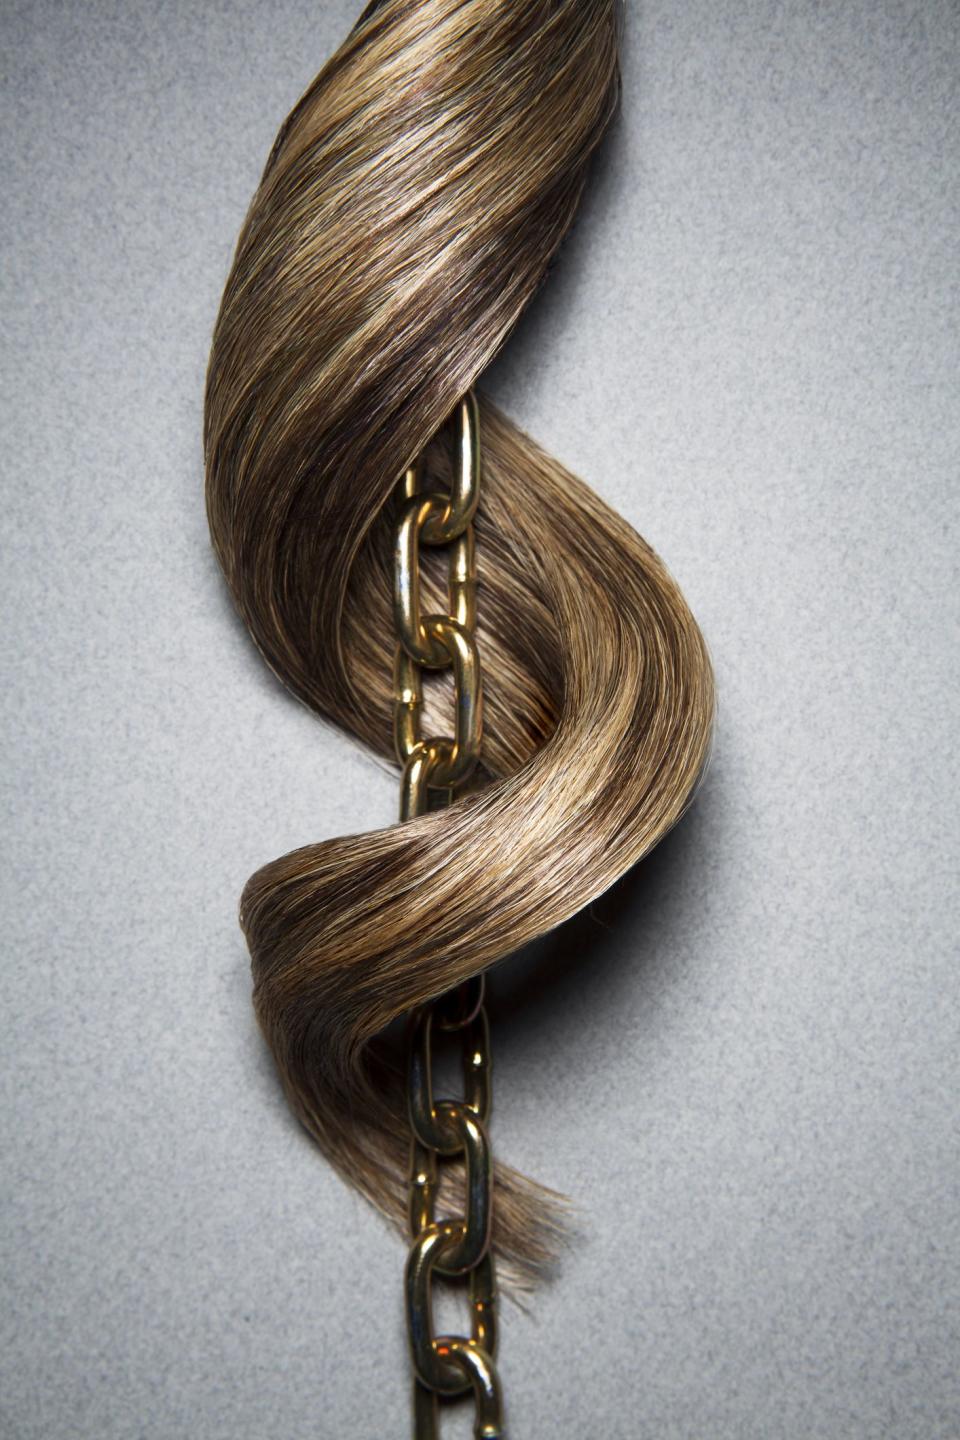 The 10 Best Bond-Building Treatments to Achieve Your Strongest Hair Ever